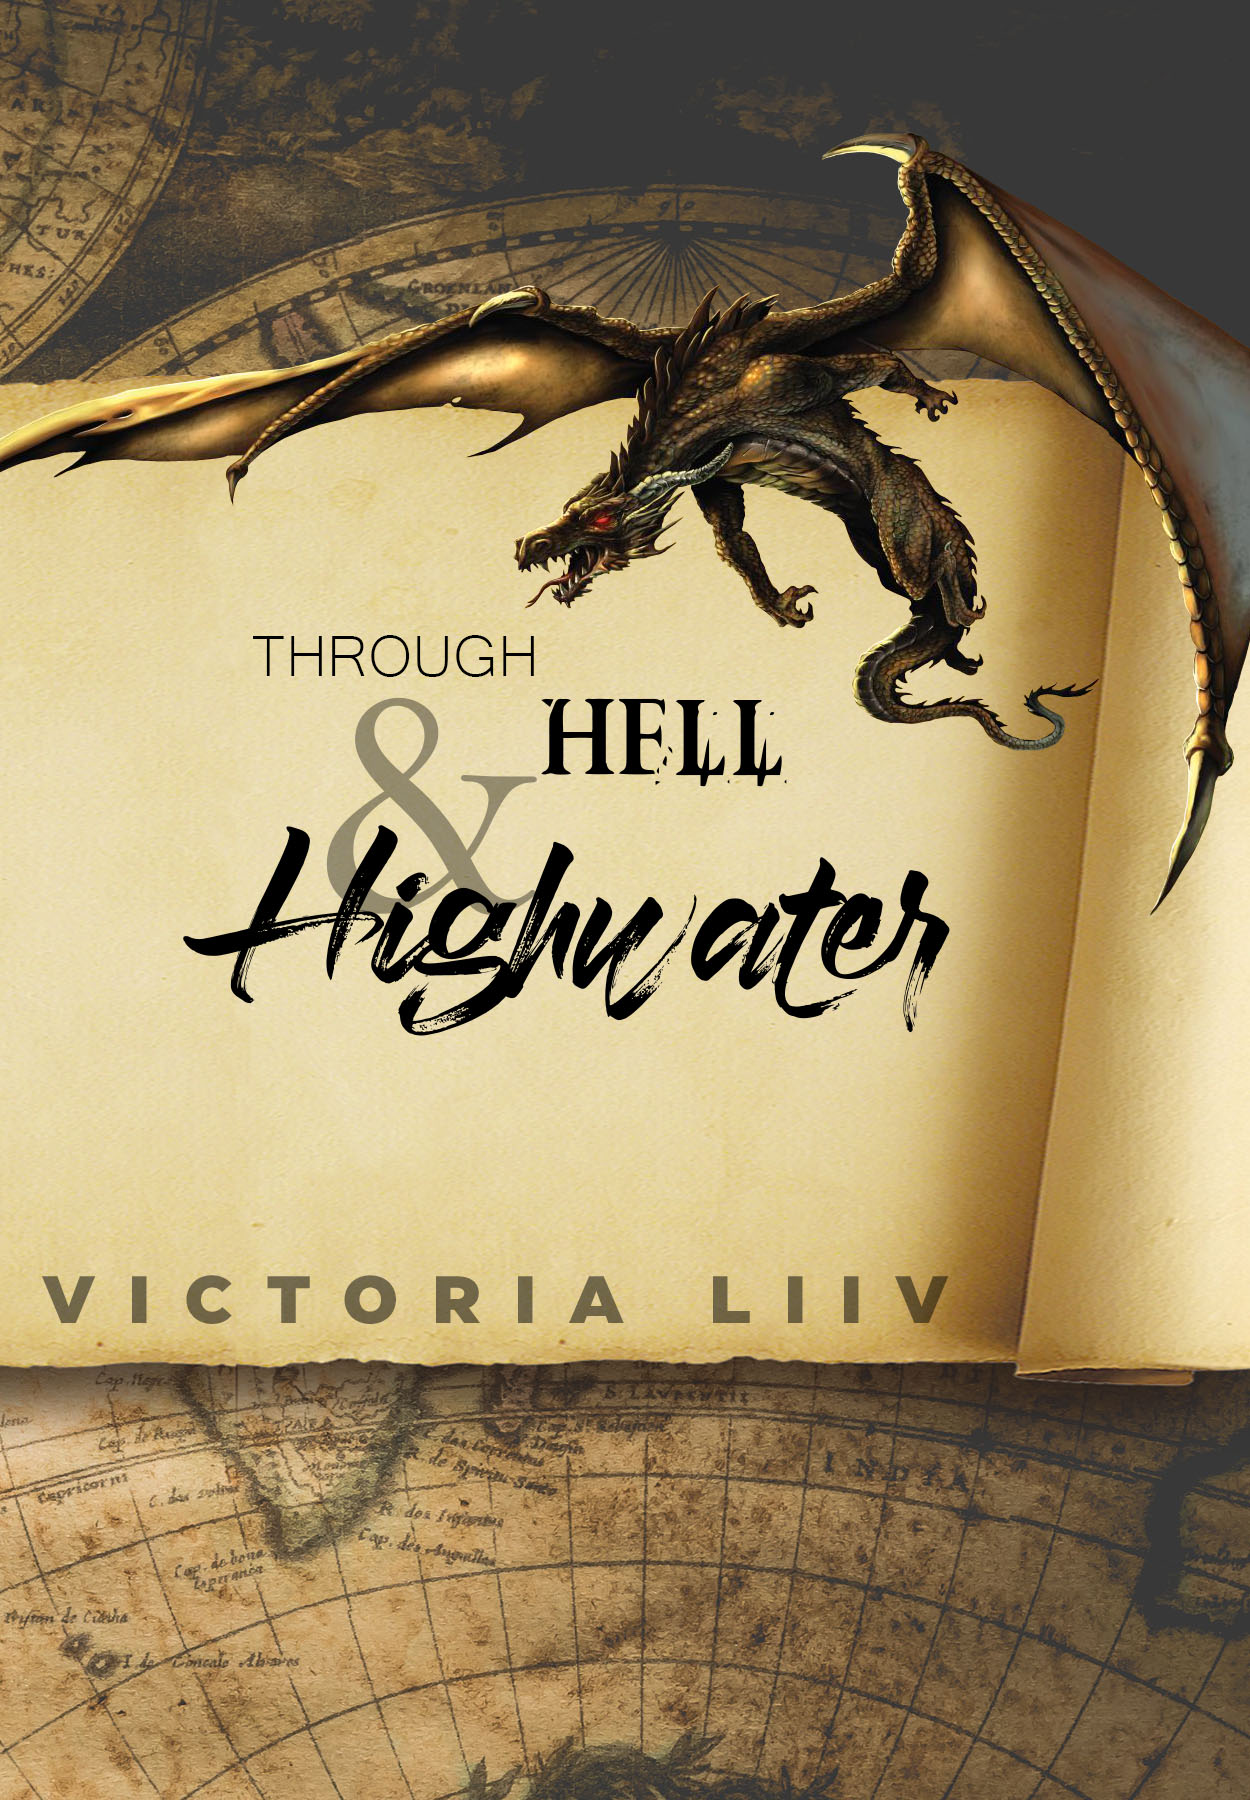 FREE: Through Hell & Highwater by Victoria Liiv